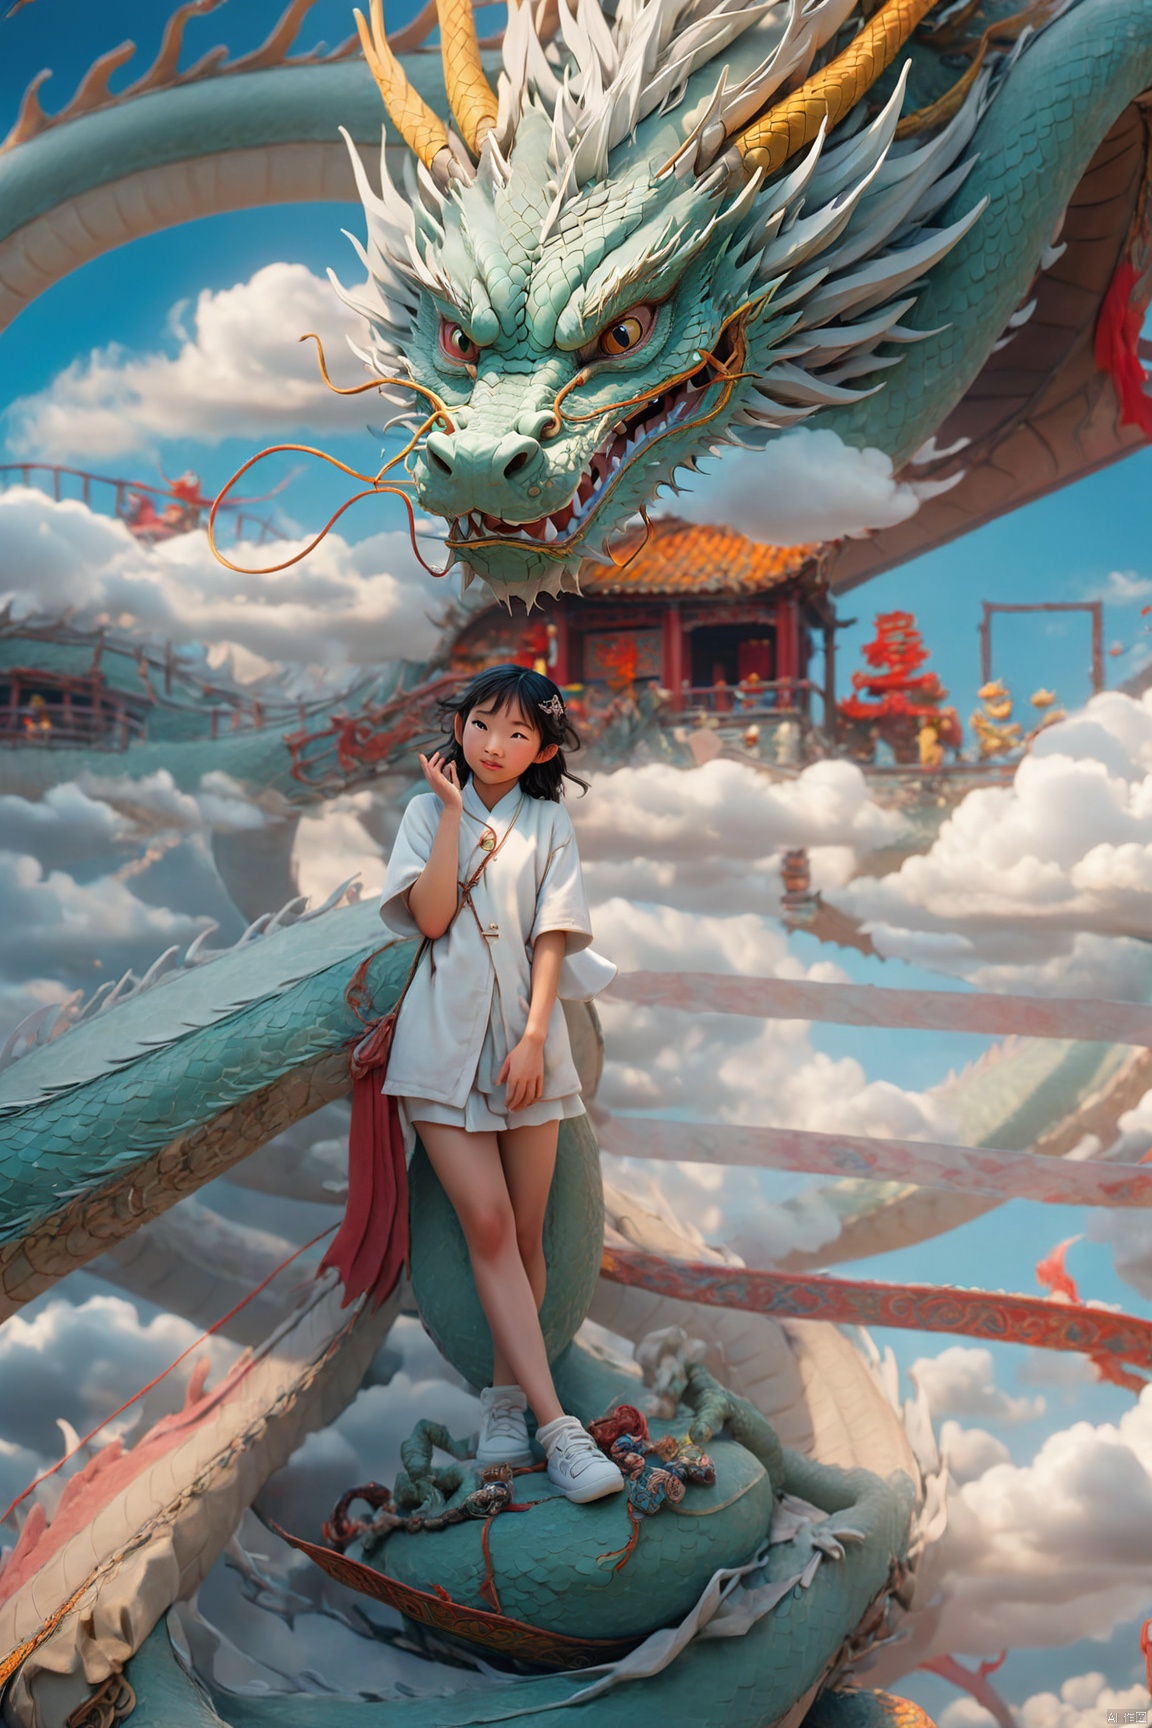  A girl wearing thin gauze,in a light and flowing outfit intertwined with a dragon,Create a distinct 3D visualization of a miniature Chinese dragon,full of characters and characters,lively in a transitional setting The backlog should be brief,having a clear blue sky or soft clouds,to keep the focus on the dragon's reliable design The dragon itself should have feature realistic textures and a lifestyle,engaging expression,captured in a way that showcases its magnetic,mythical nature in a heartbeat,invading Manner, looking at the camera,(pore:1.2),asia,ultimate details,